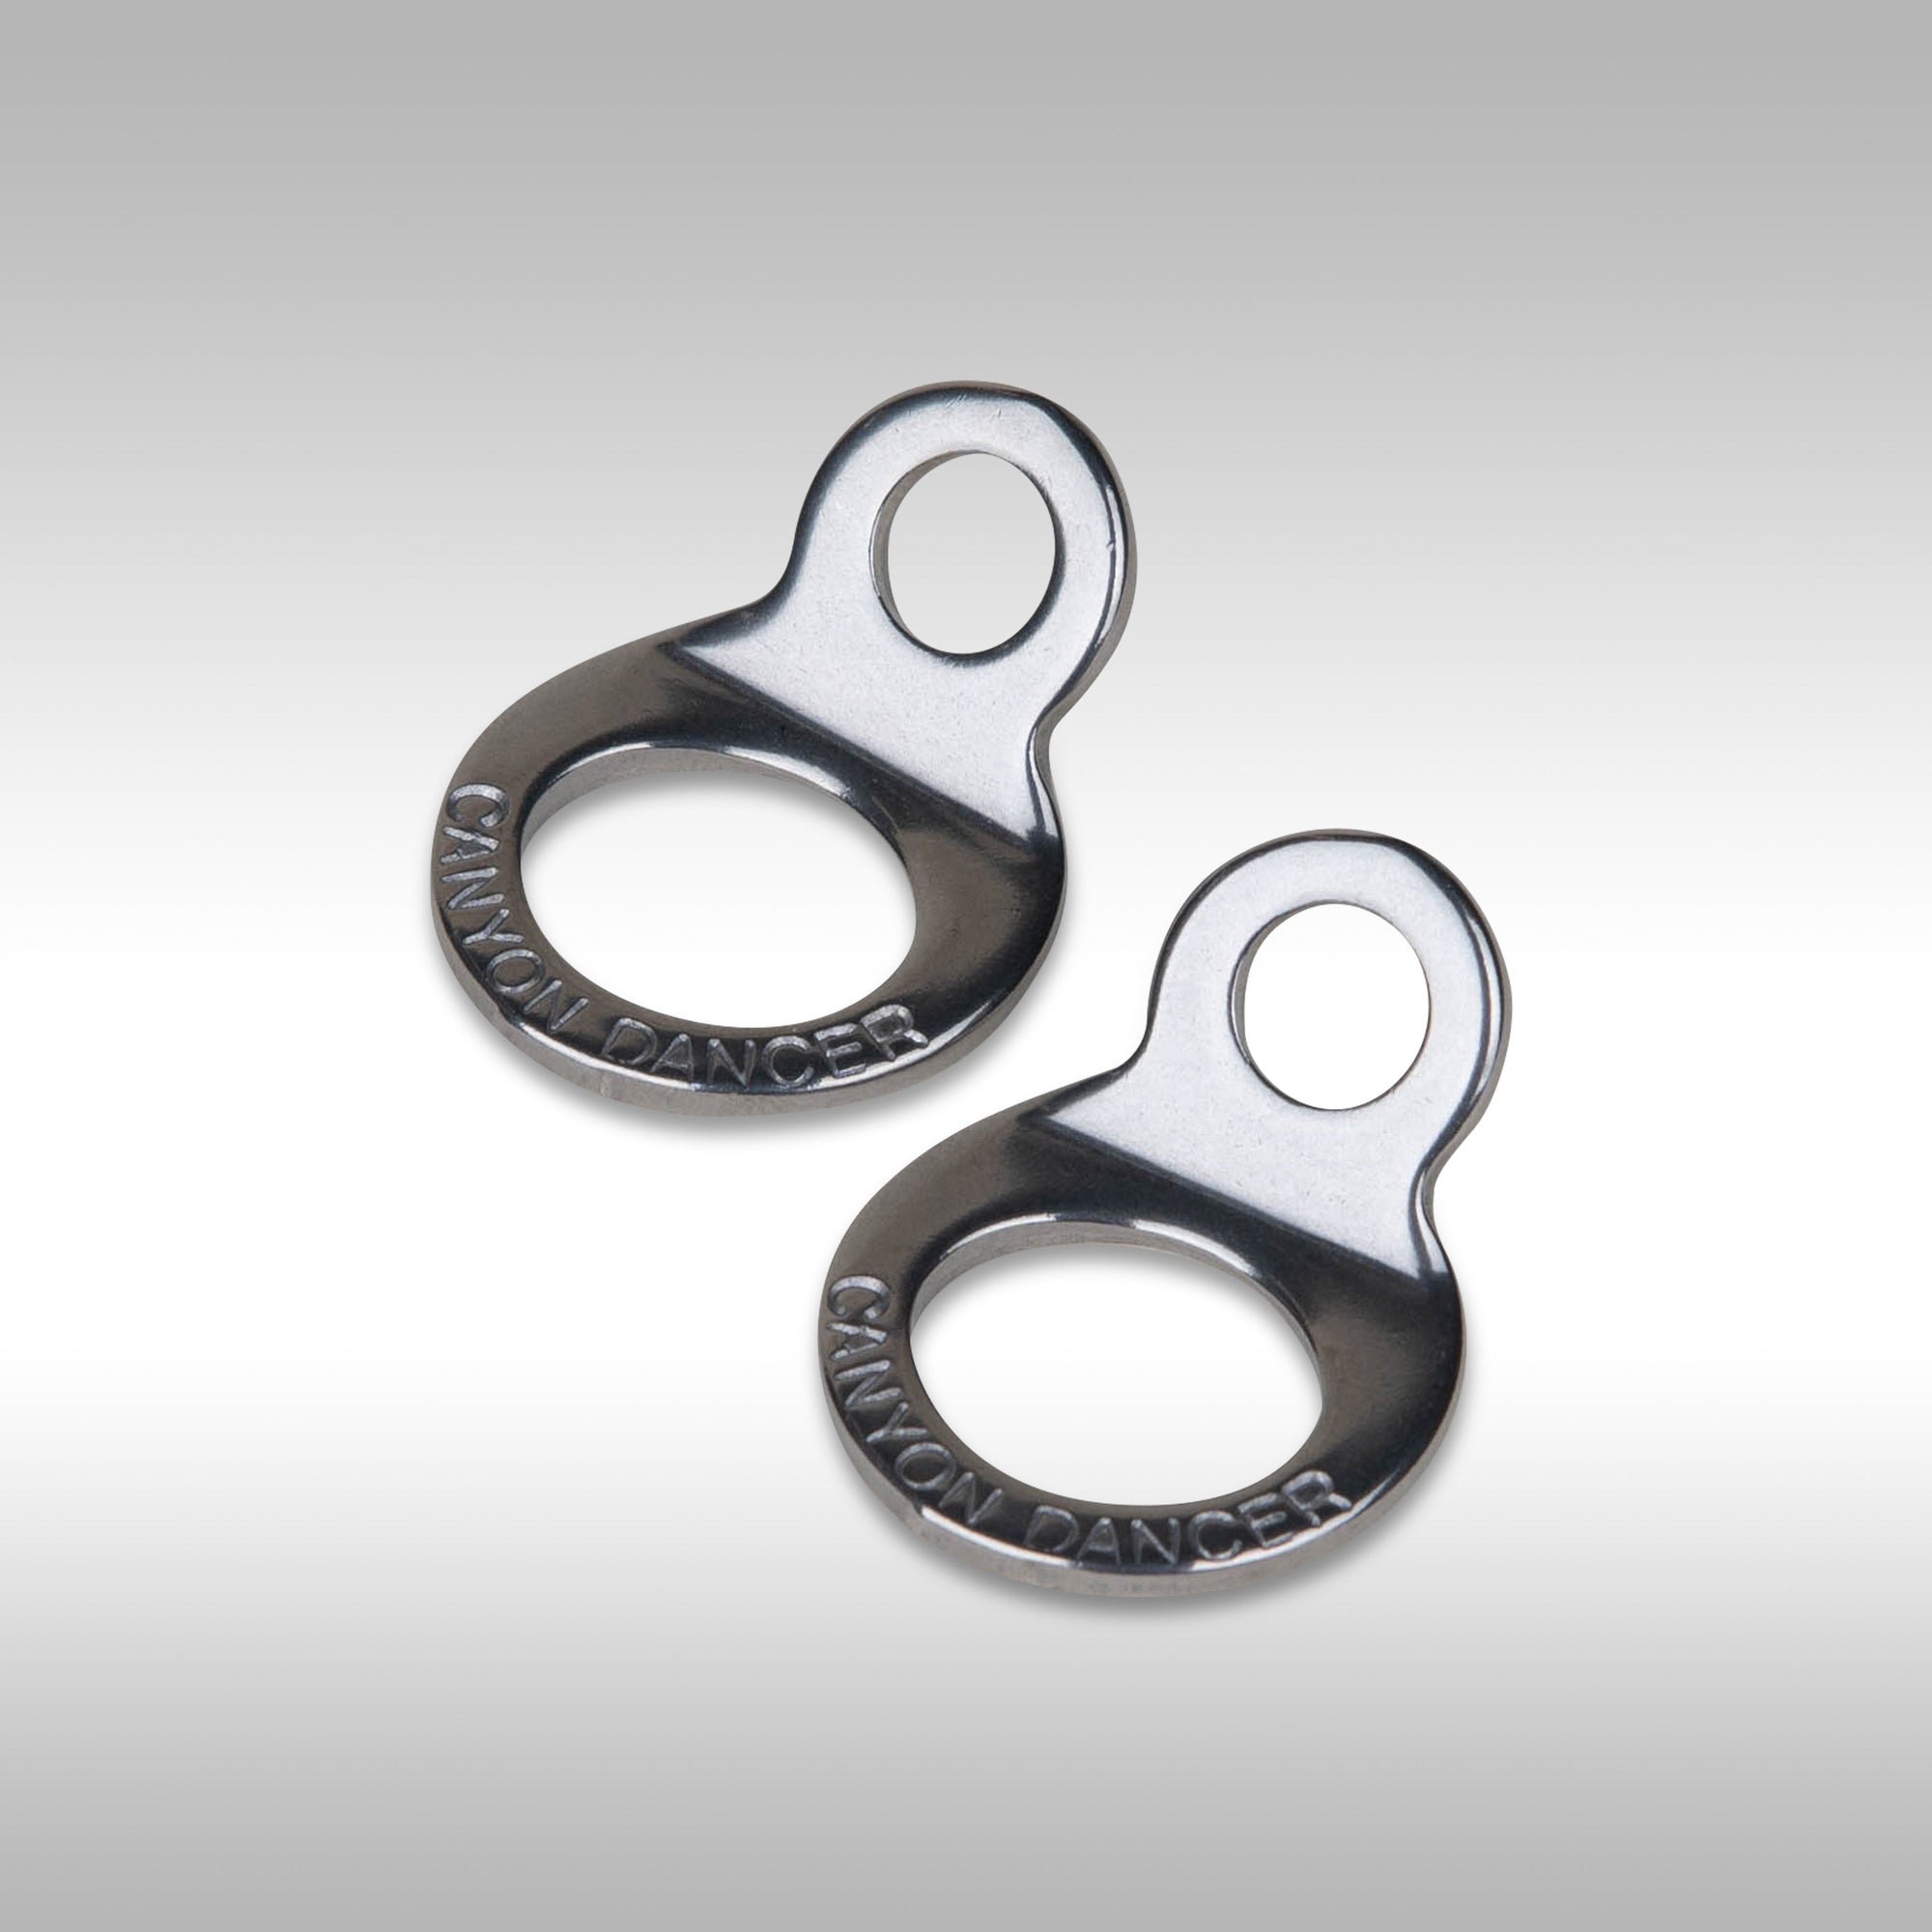 Stainless steel rings that can be mounted to your triple clamps for an easy tie down point on your motorcycle. Built to hold 2000 pounds each. A better way to tie down your motorcycle when transporting it. 